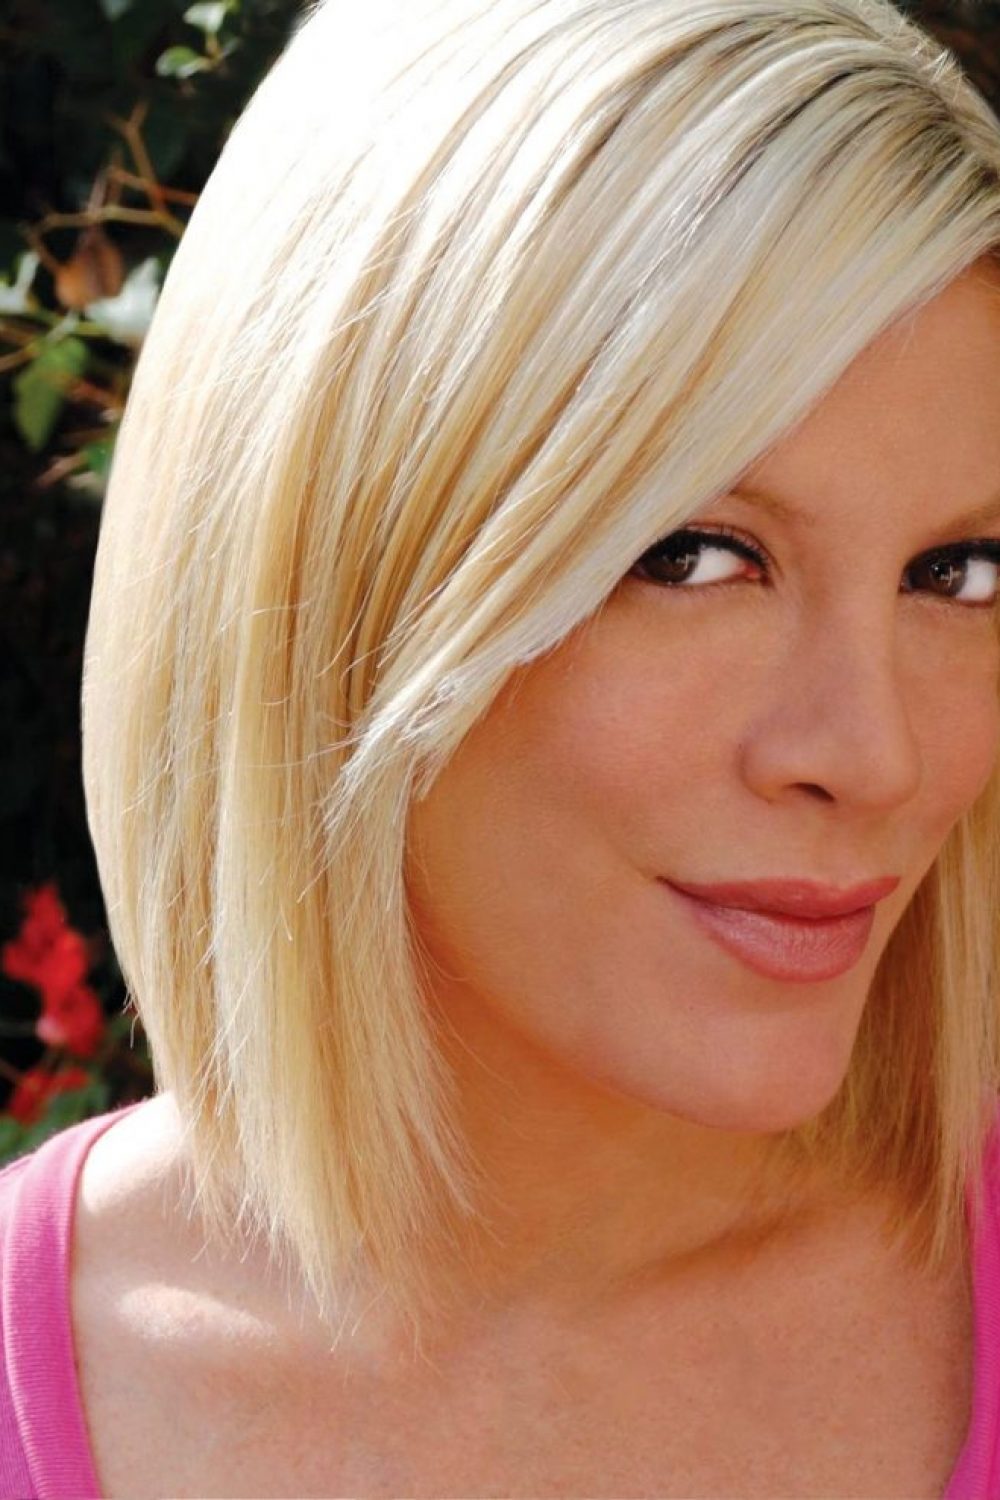 Exclusive Interview! Tori Spelling Spills on Her Love of Heels (and more!)